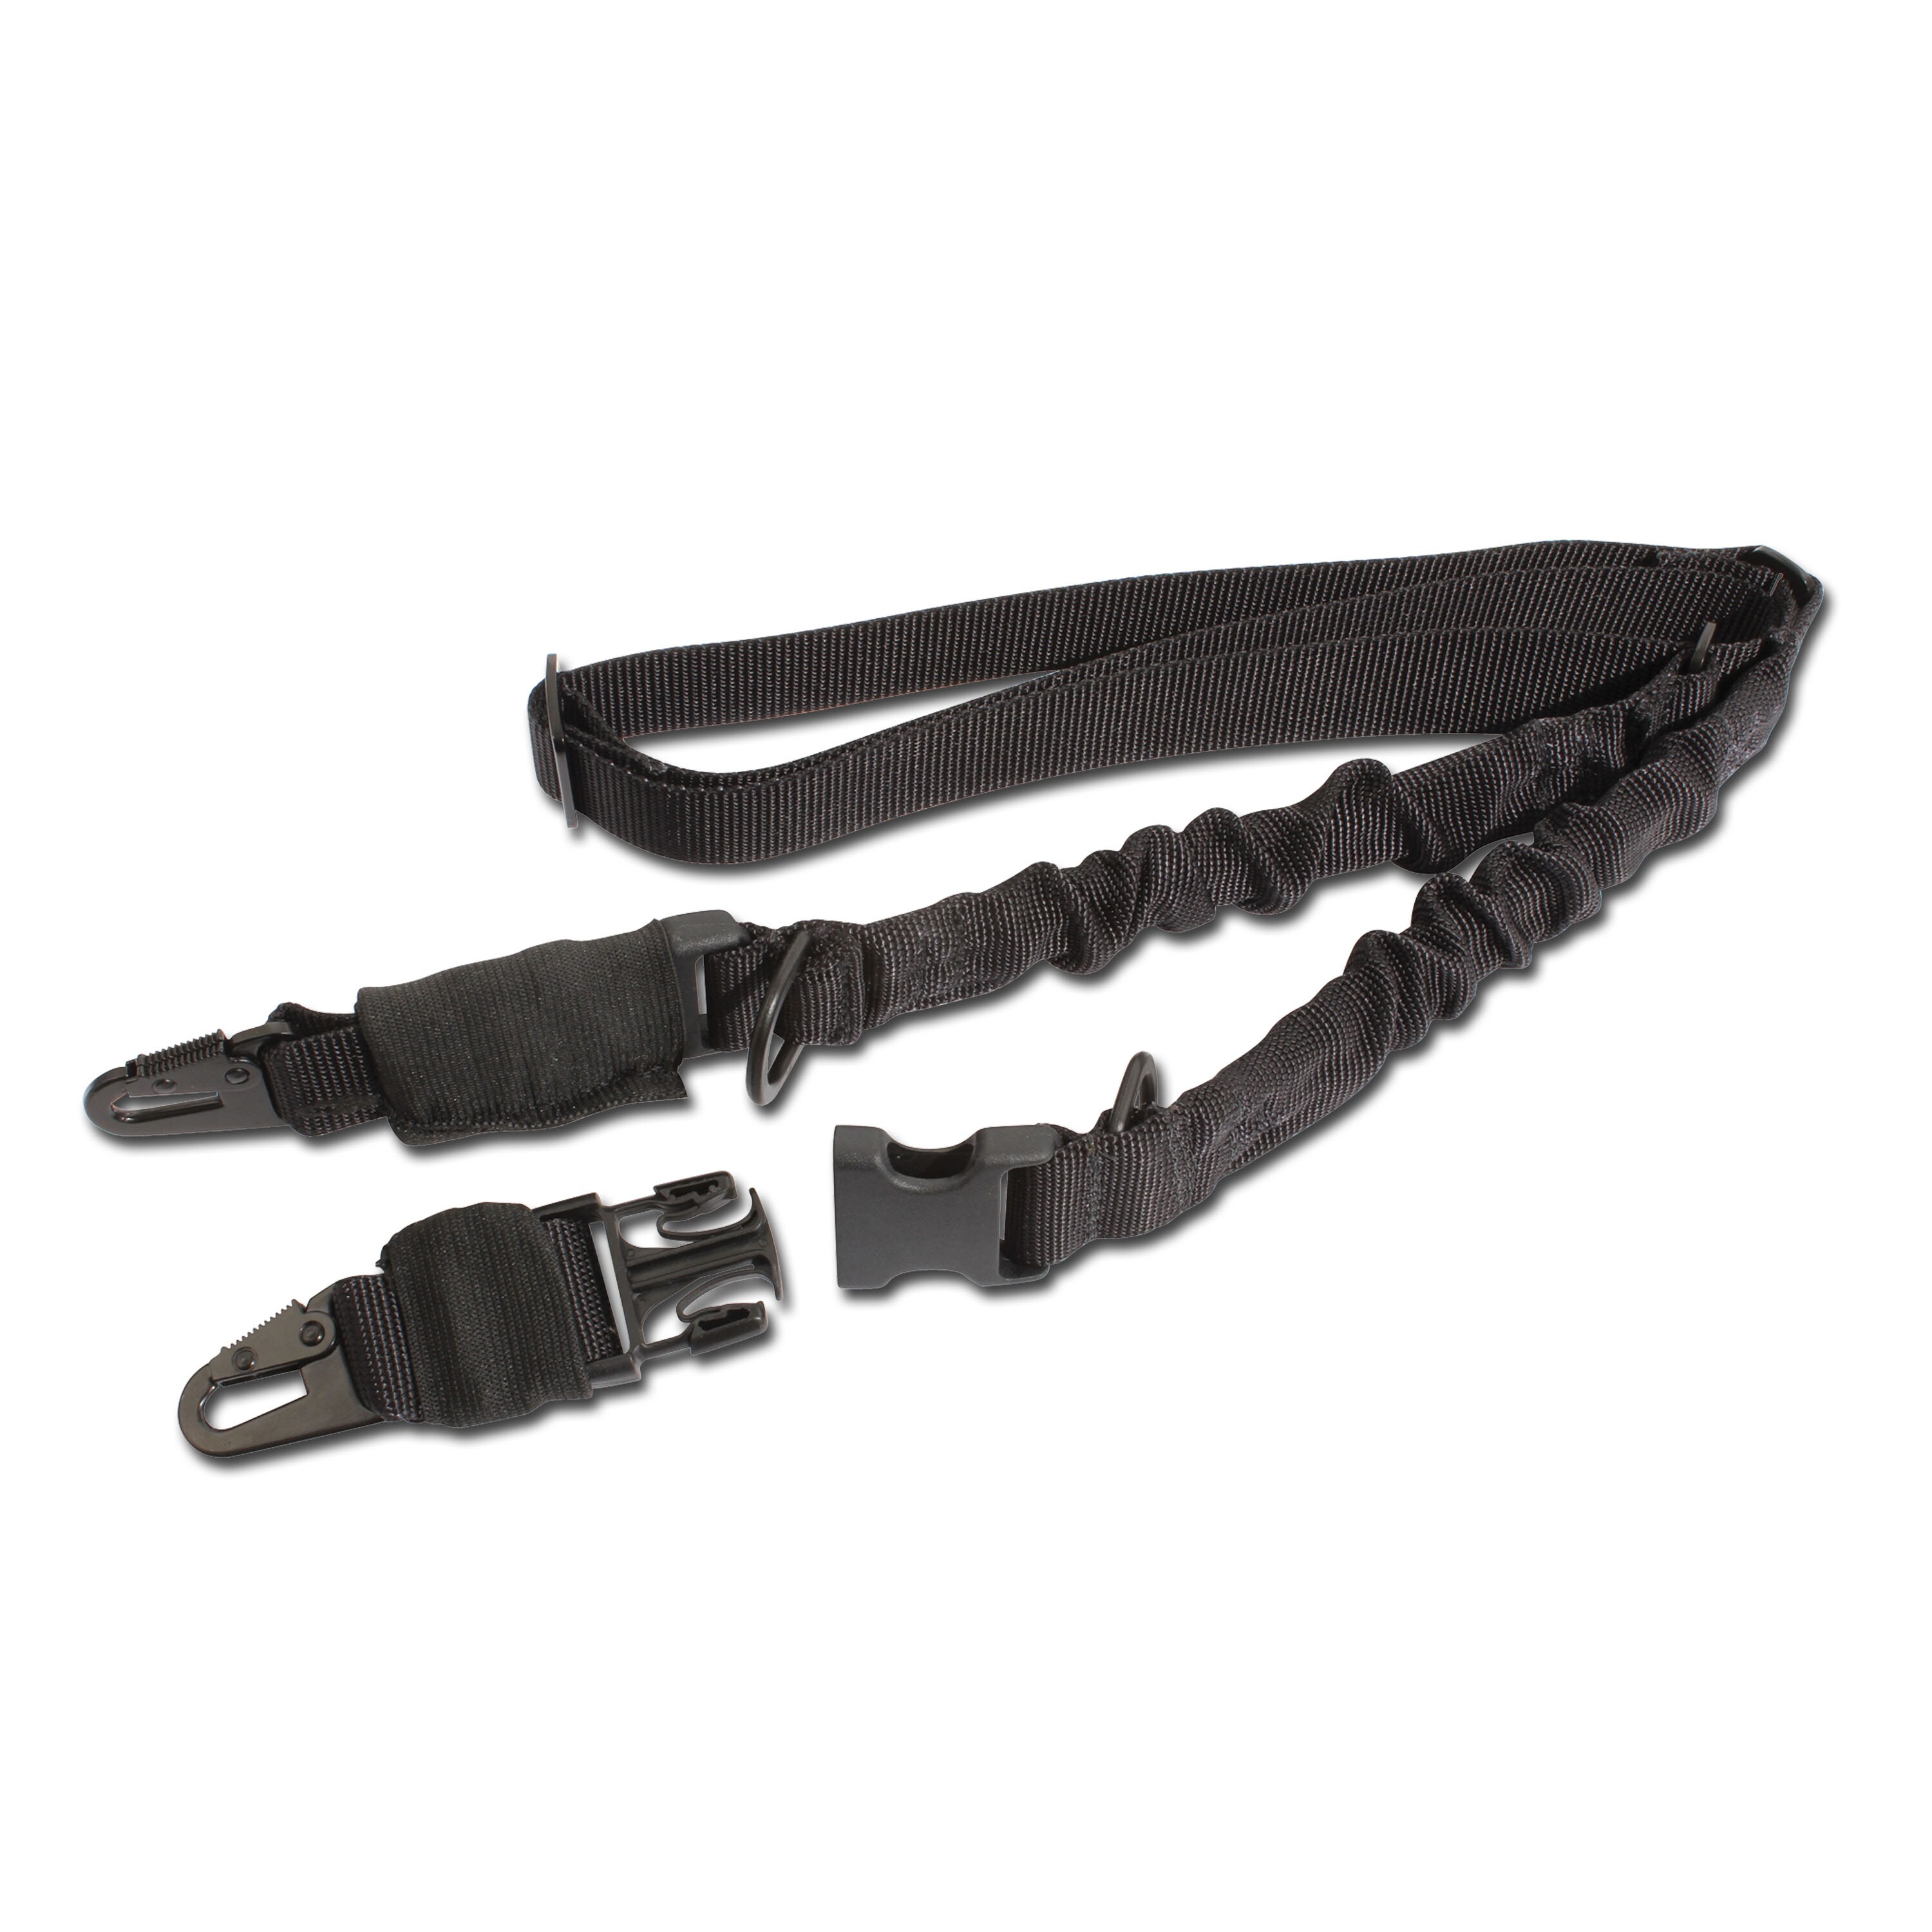 One Single Point Key Sling Tactical Sling Strap Adjustable Camping Quick Release 